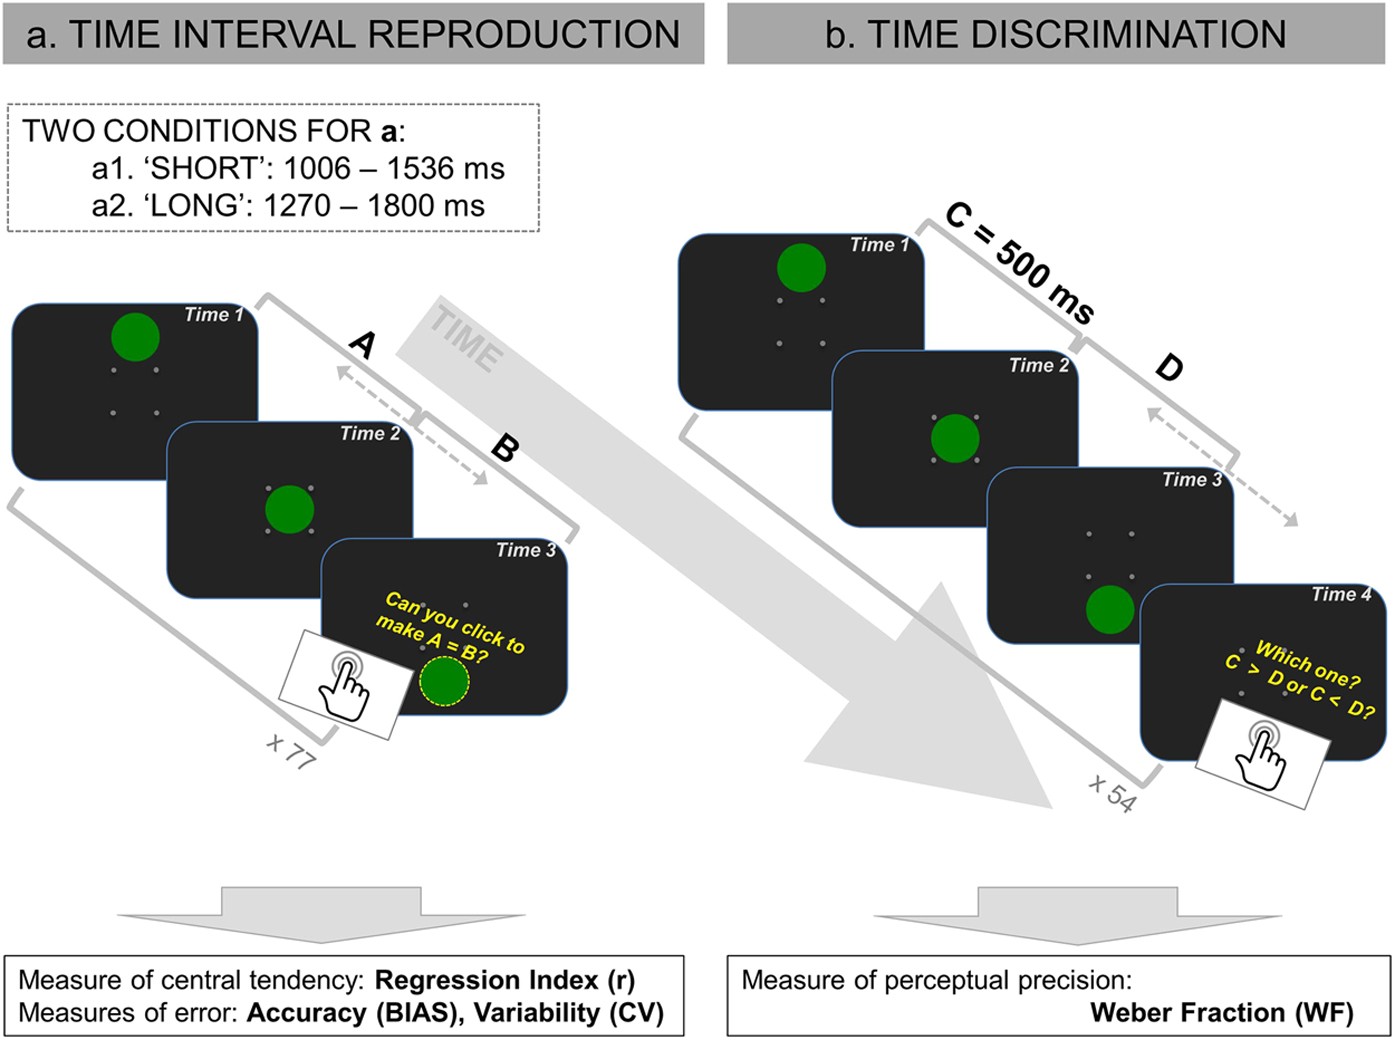 Central Tendency Effects In Time Interval Reproduction In Autism